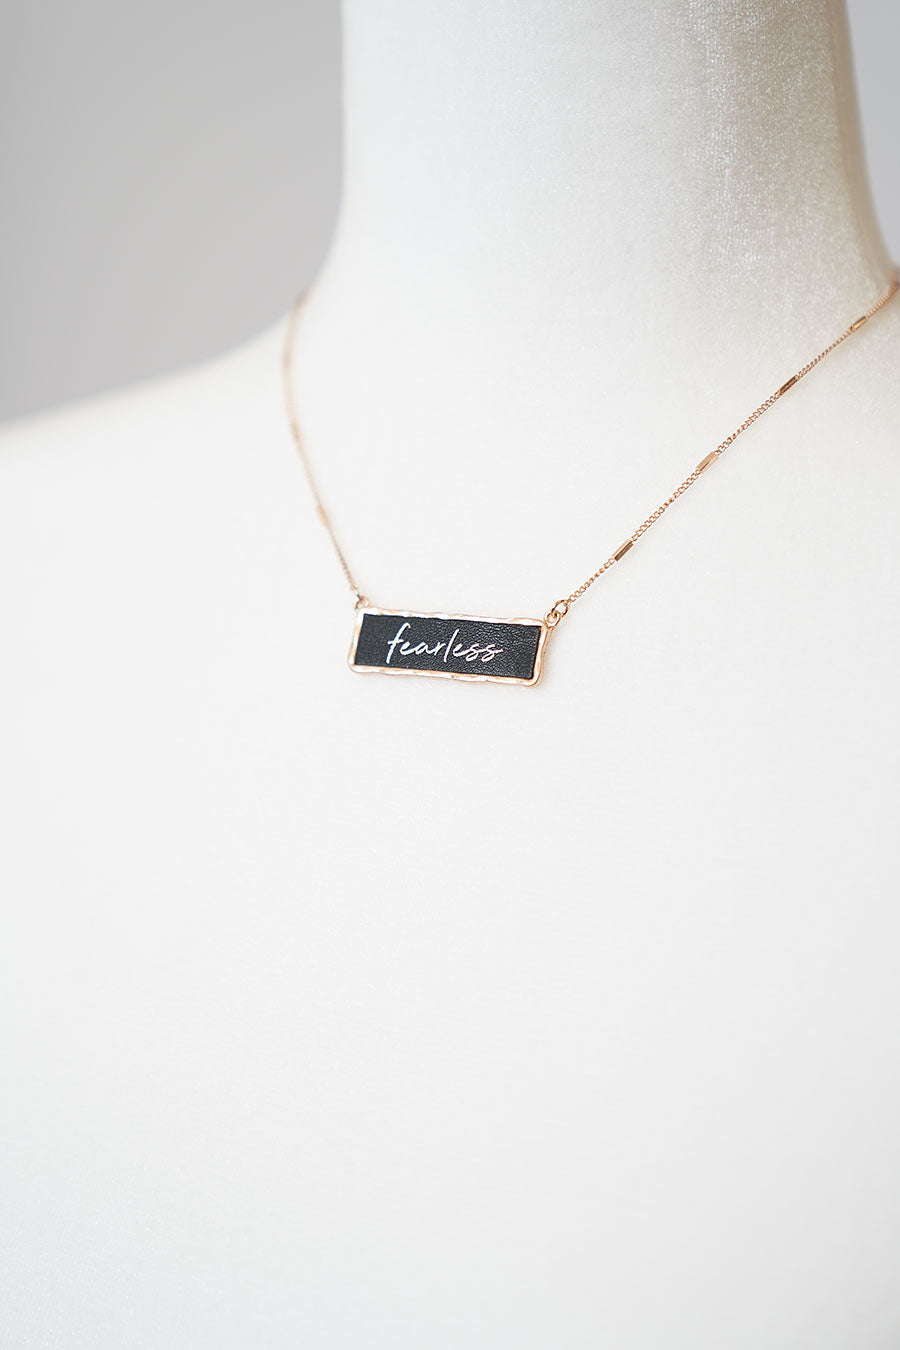 Fearless Necklace Front2